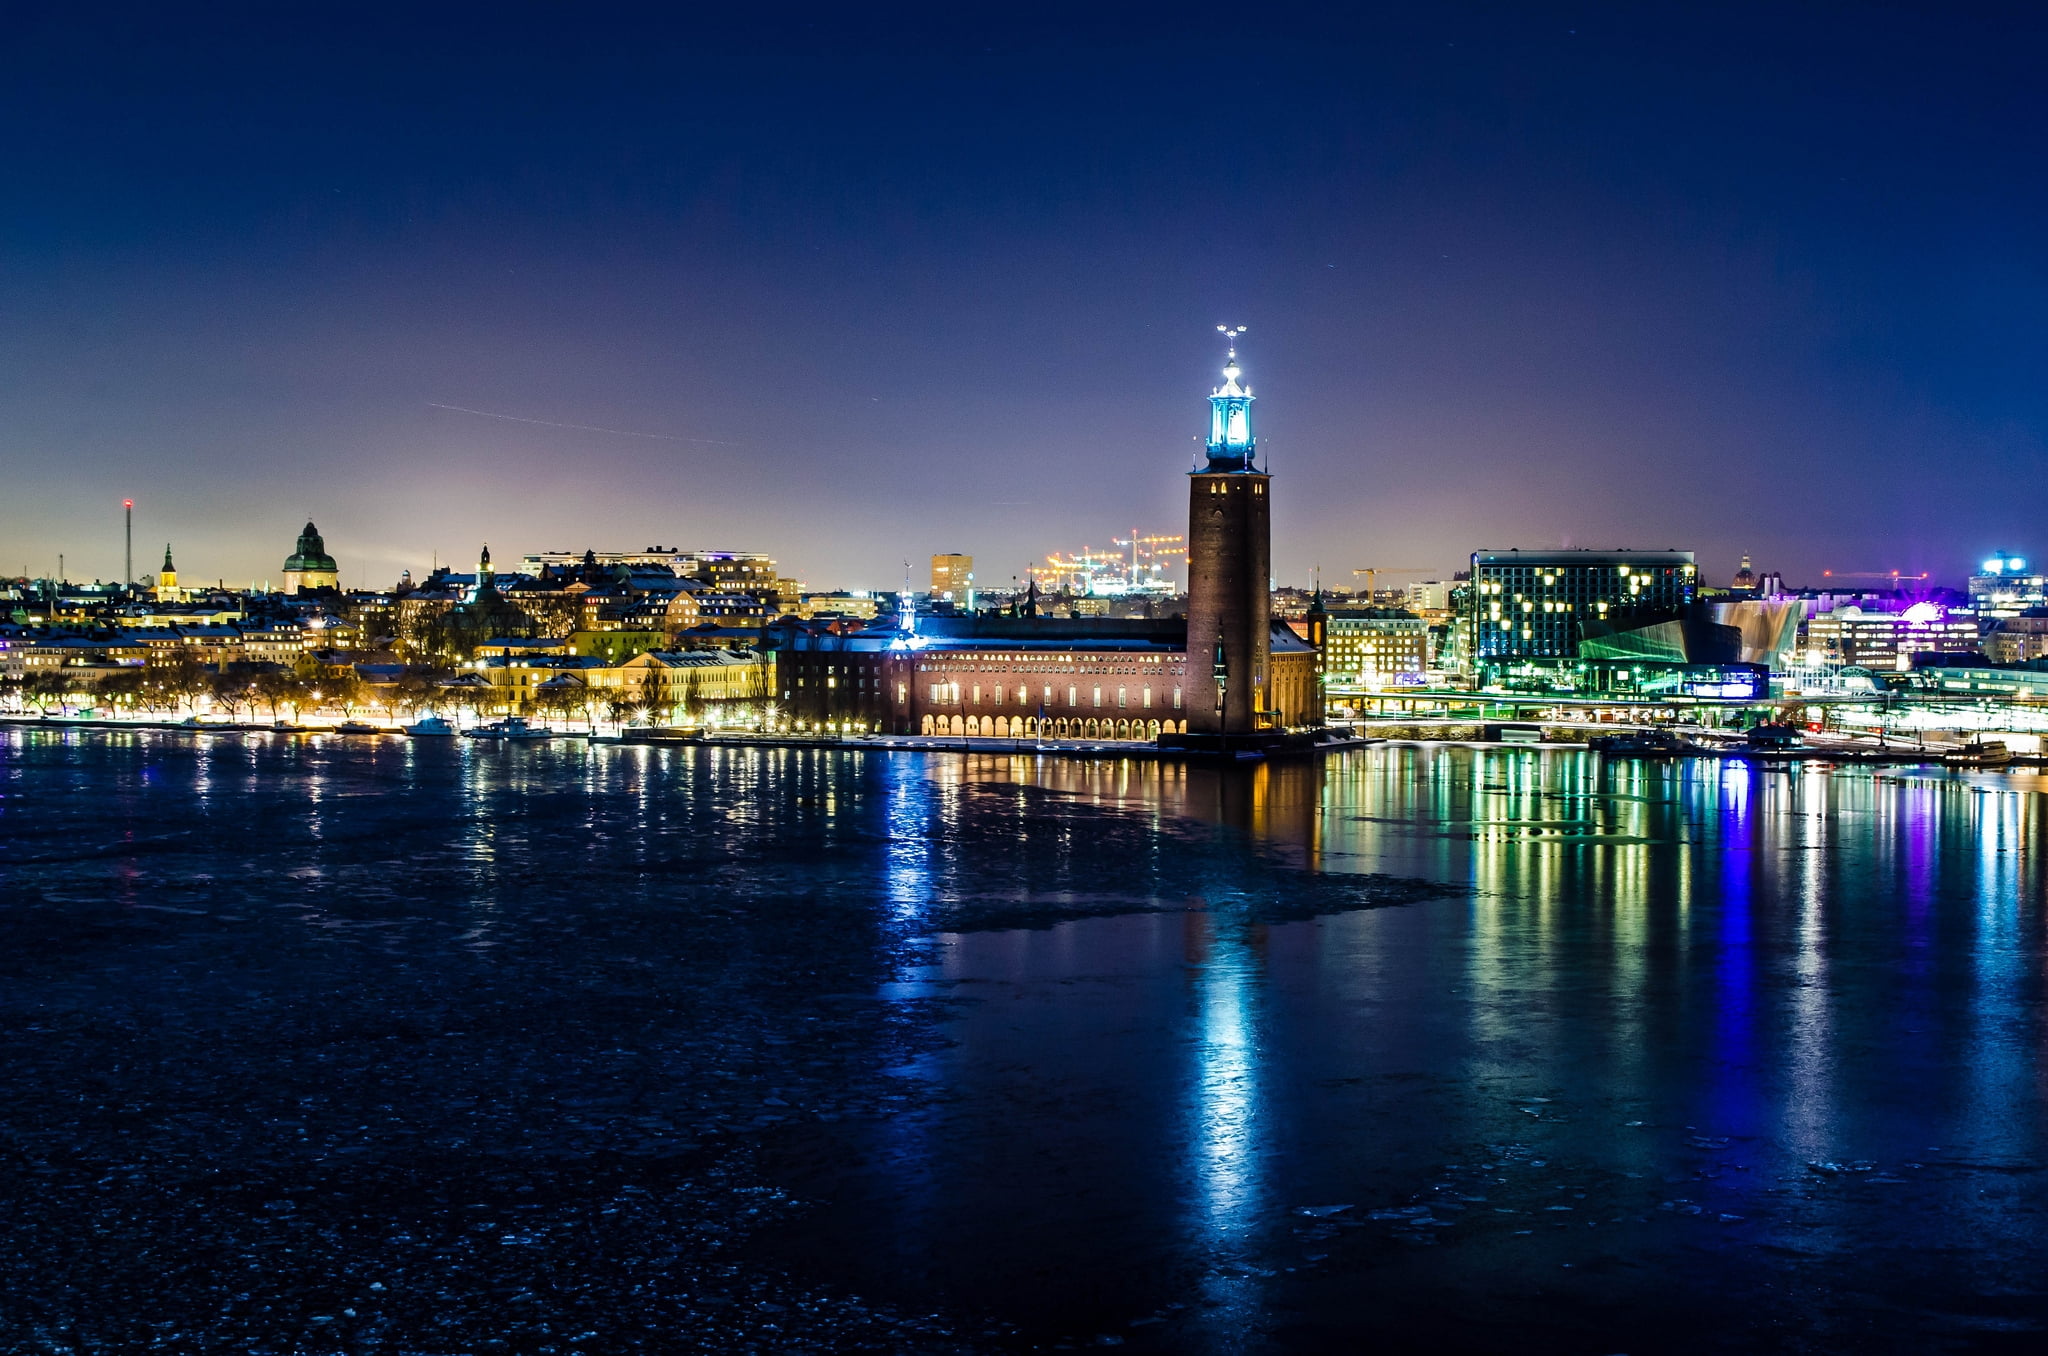 body of water, sweden, stockholm, winter, night, city hall, lights